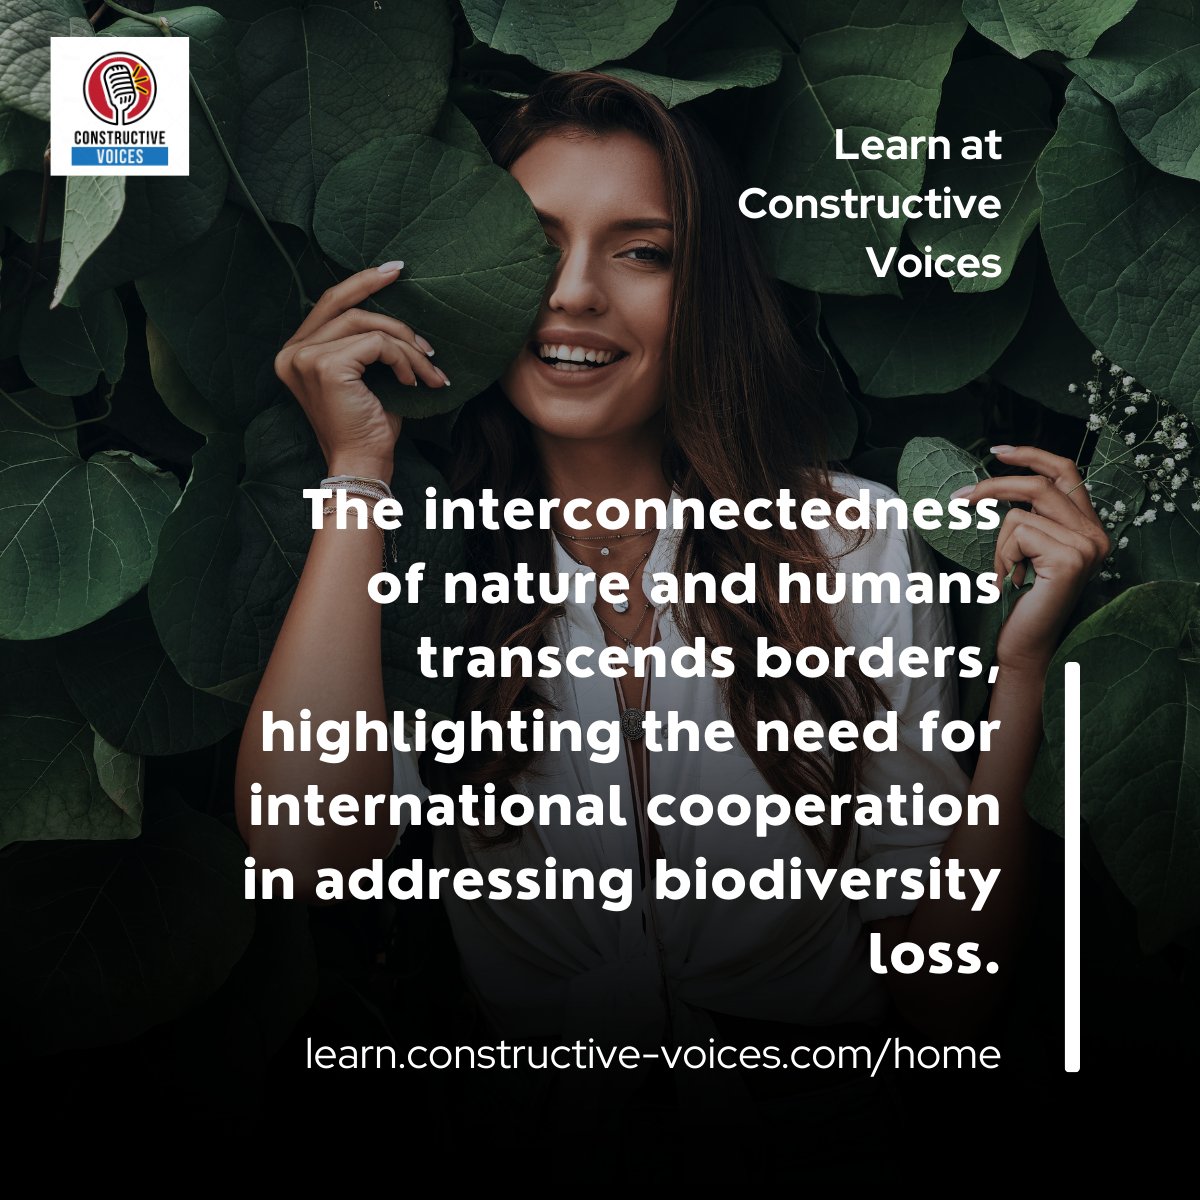 'The interconnectedness of nature and humans transcends borders, highlighting the need for international cooperation in addressing biodiversity loss.' #biodiversity #biodiversitynetgain #training - learn.constructive-voices.com/home/